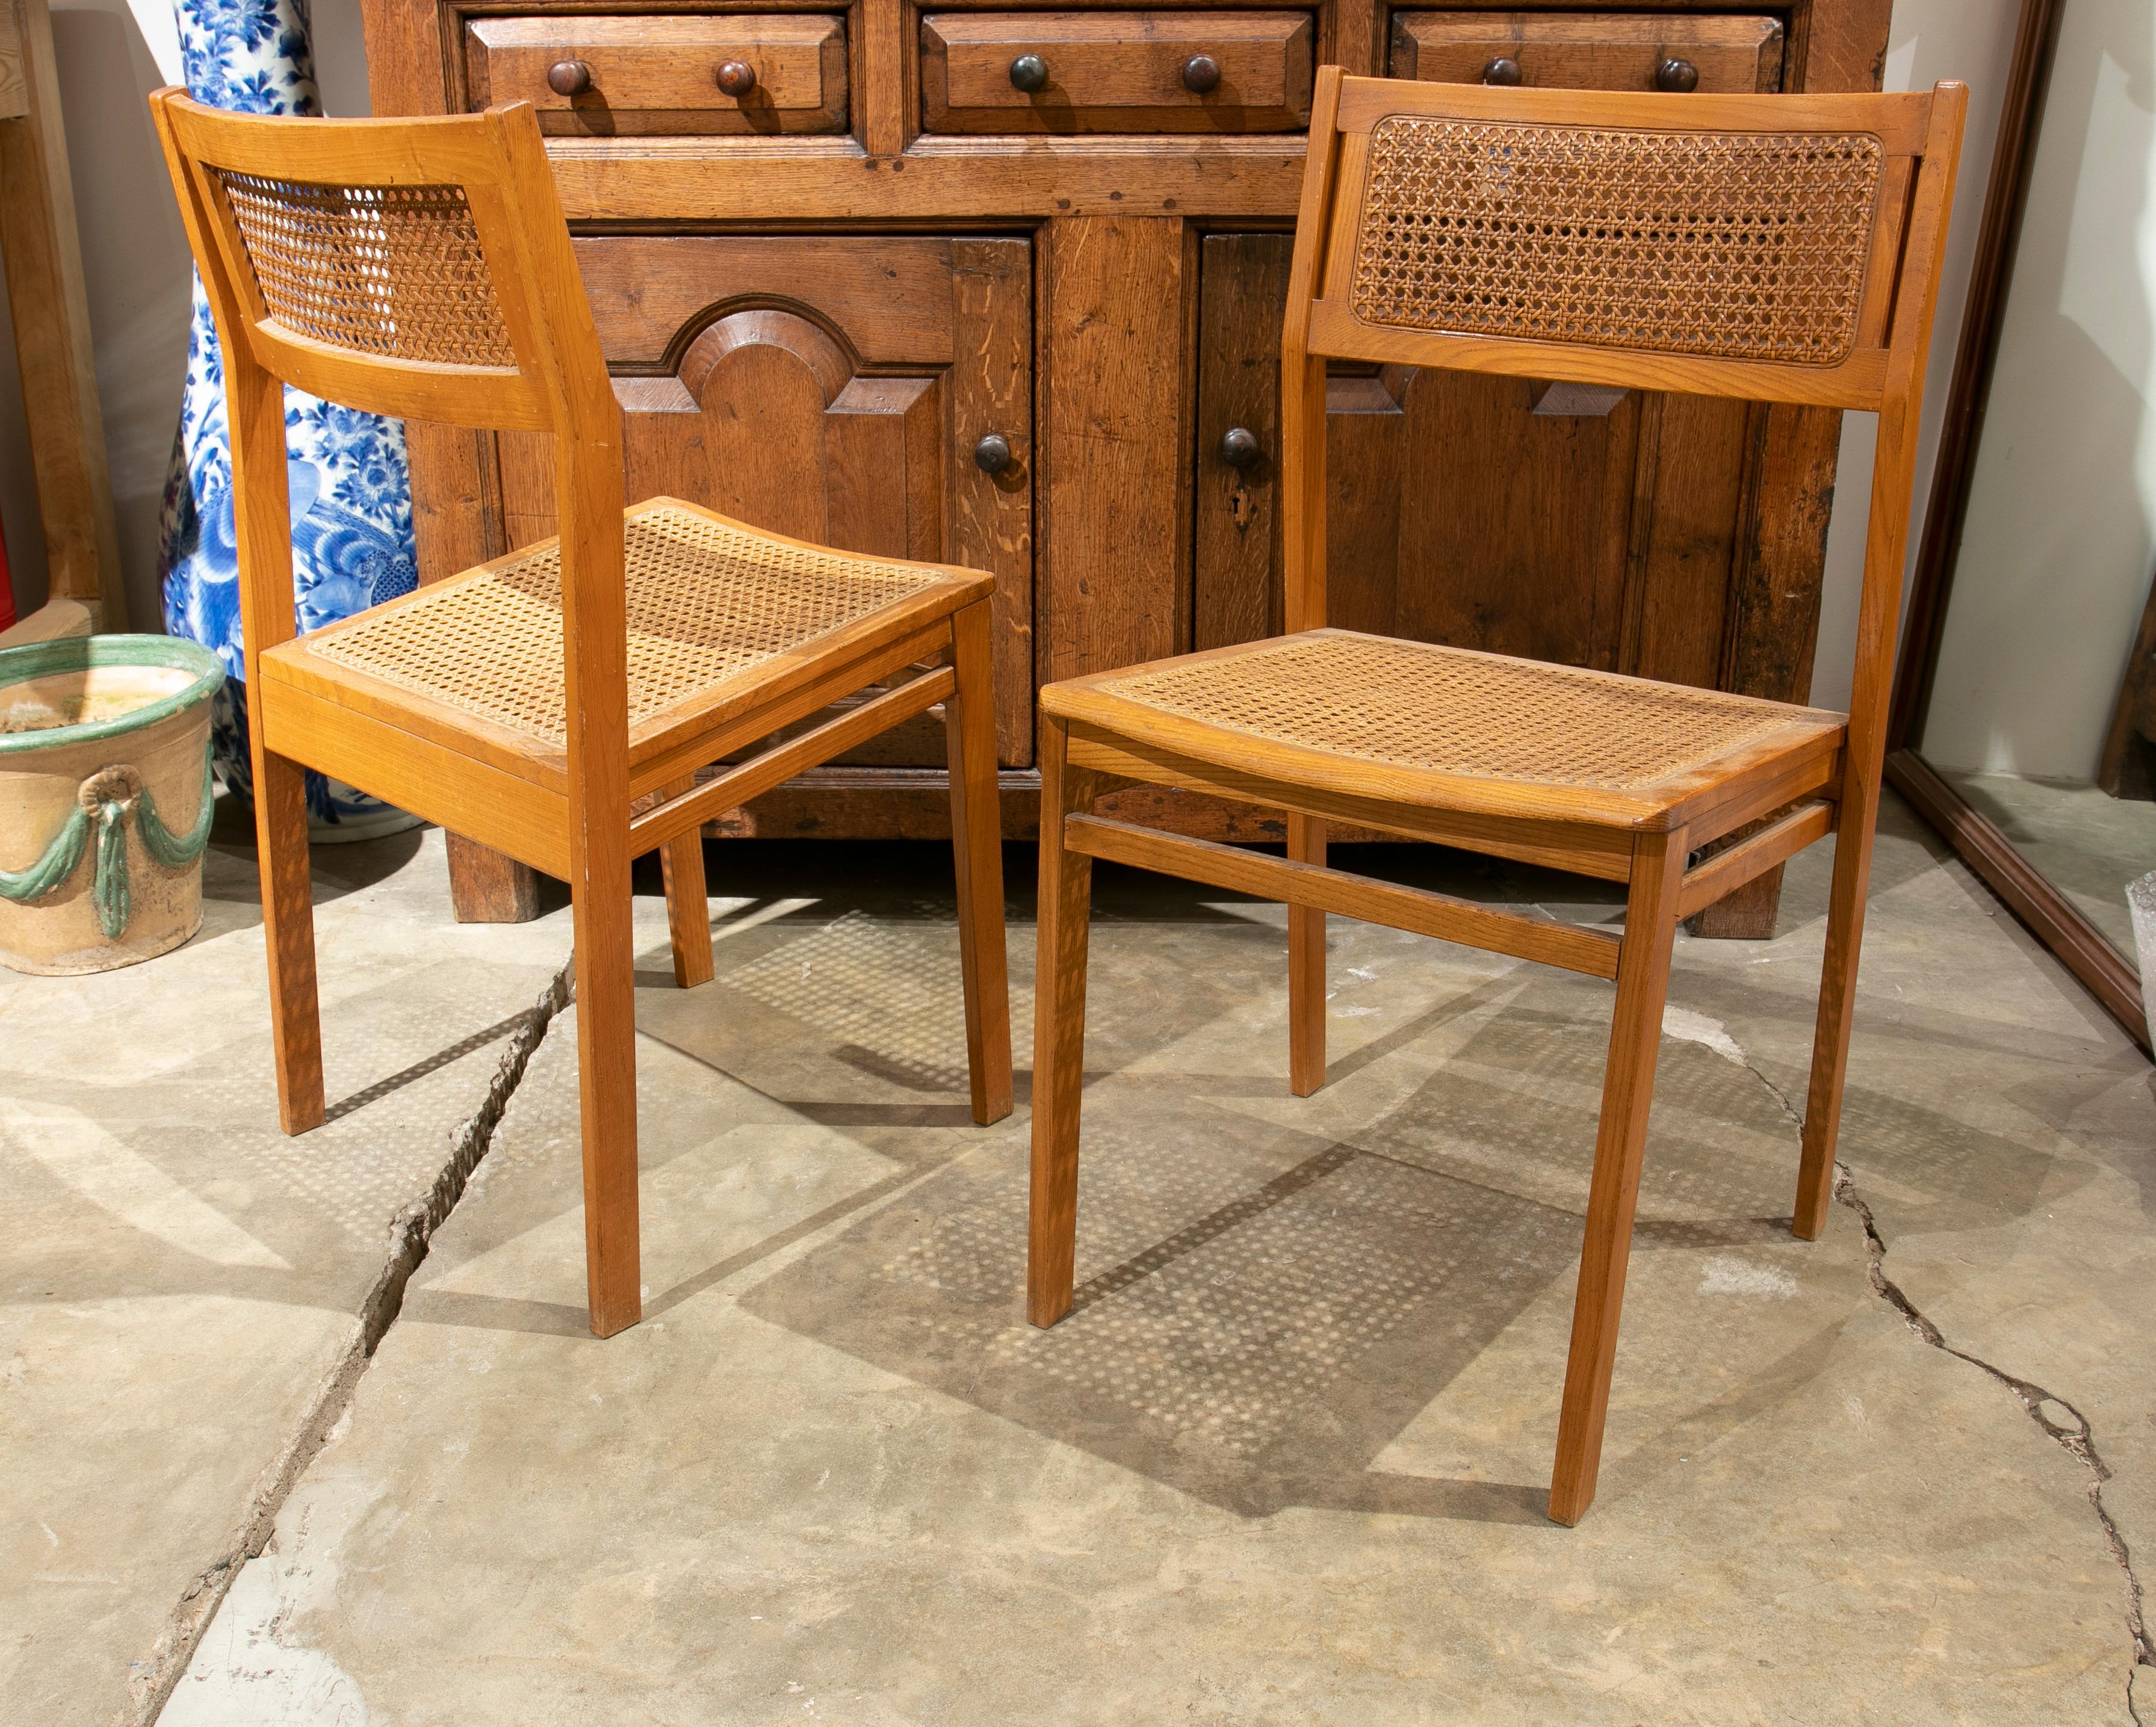 1970s Swedish Pair of Wooden Chairs with Wicker Seat and Back For Sale 6